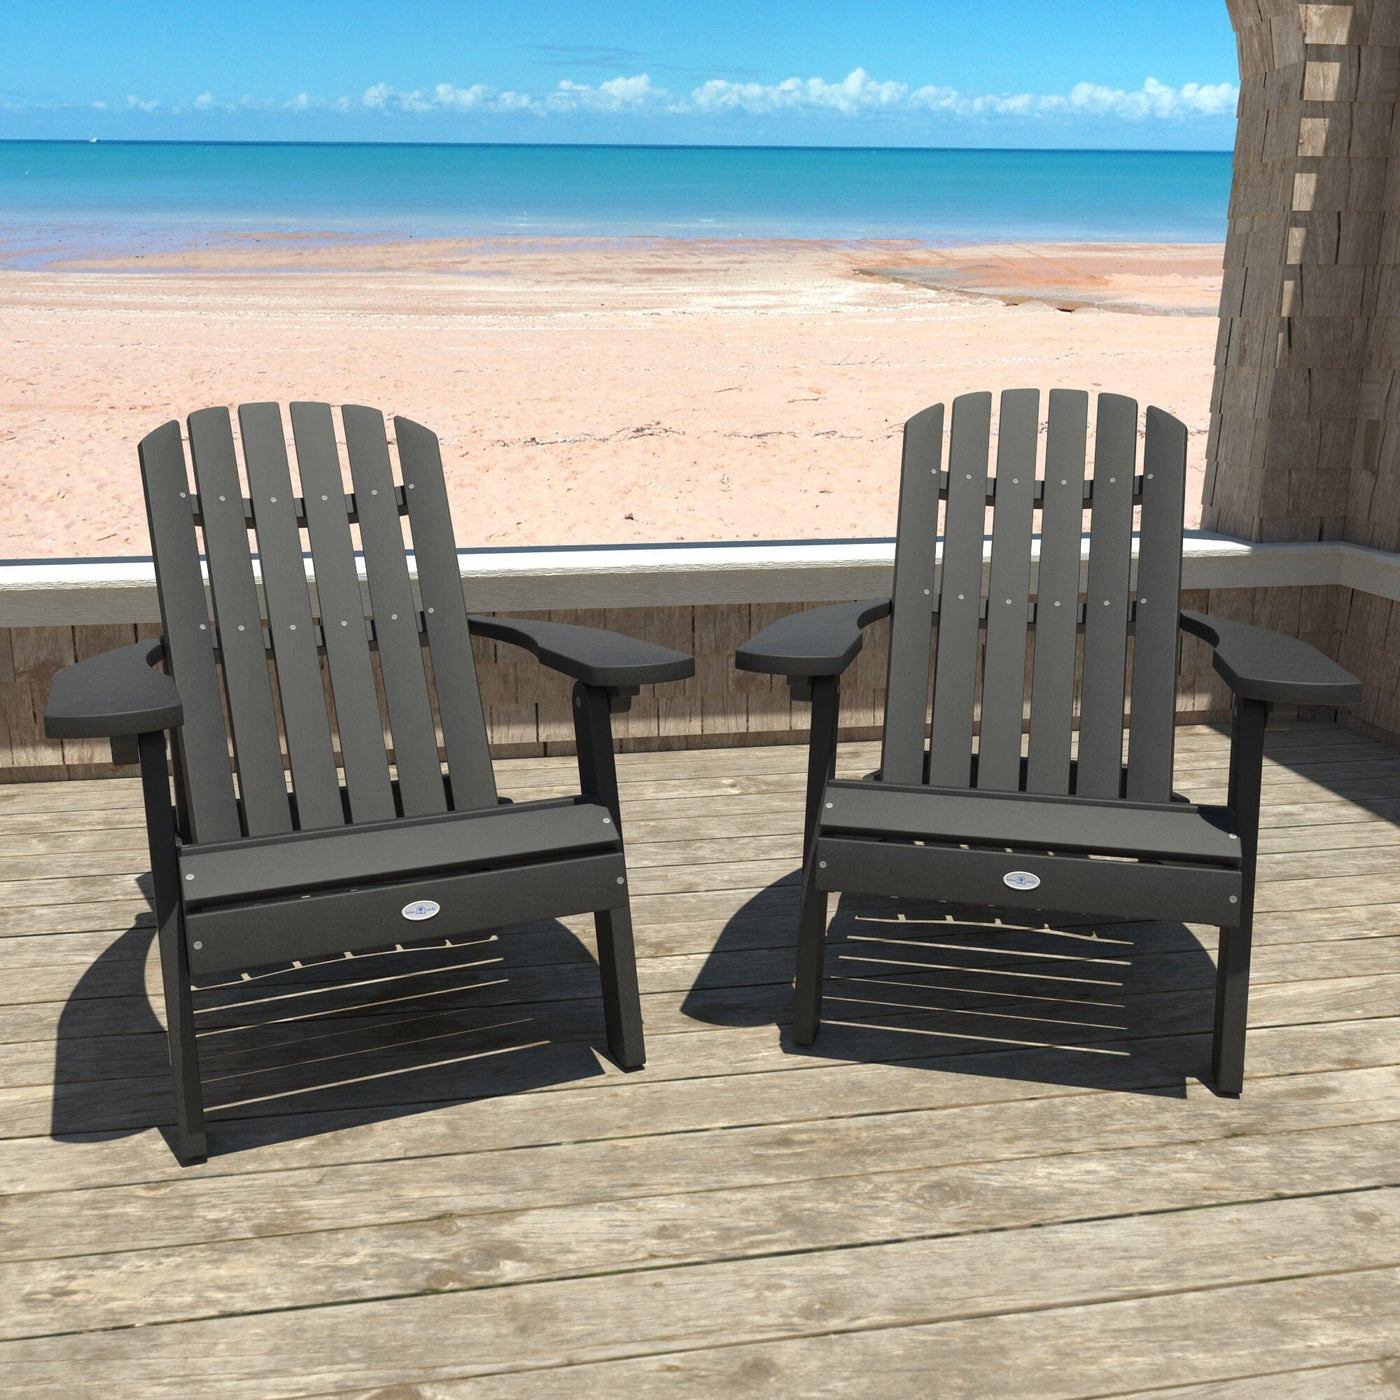 Cape Folding and Reclining Adirondack Chair (Set of 2) Kitted Set Bahia Verde Outdoors 